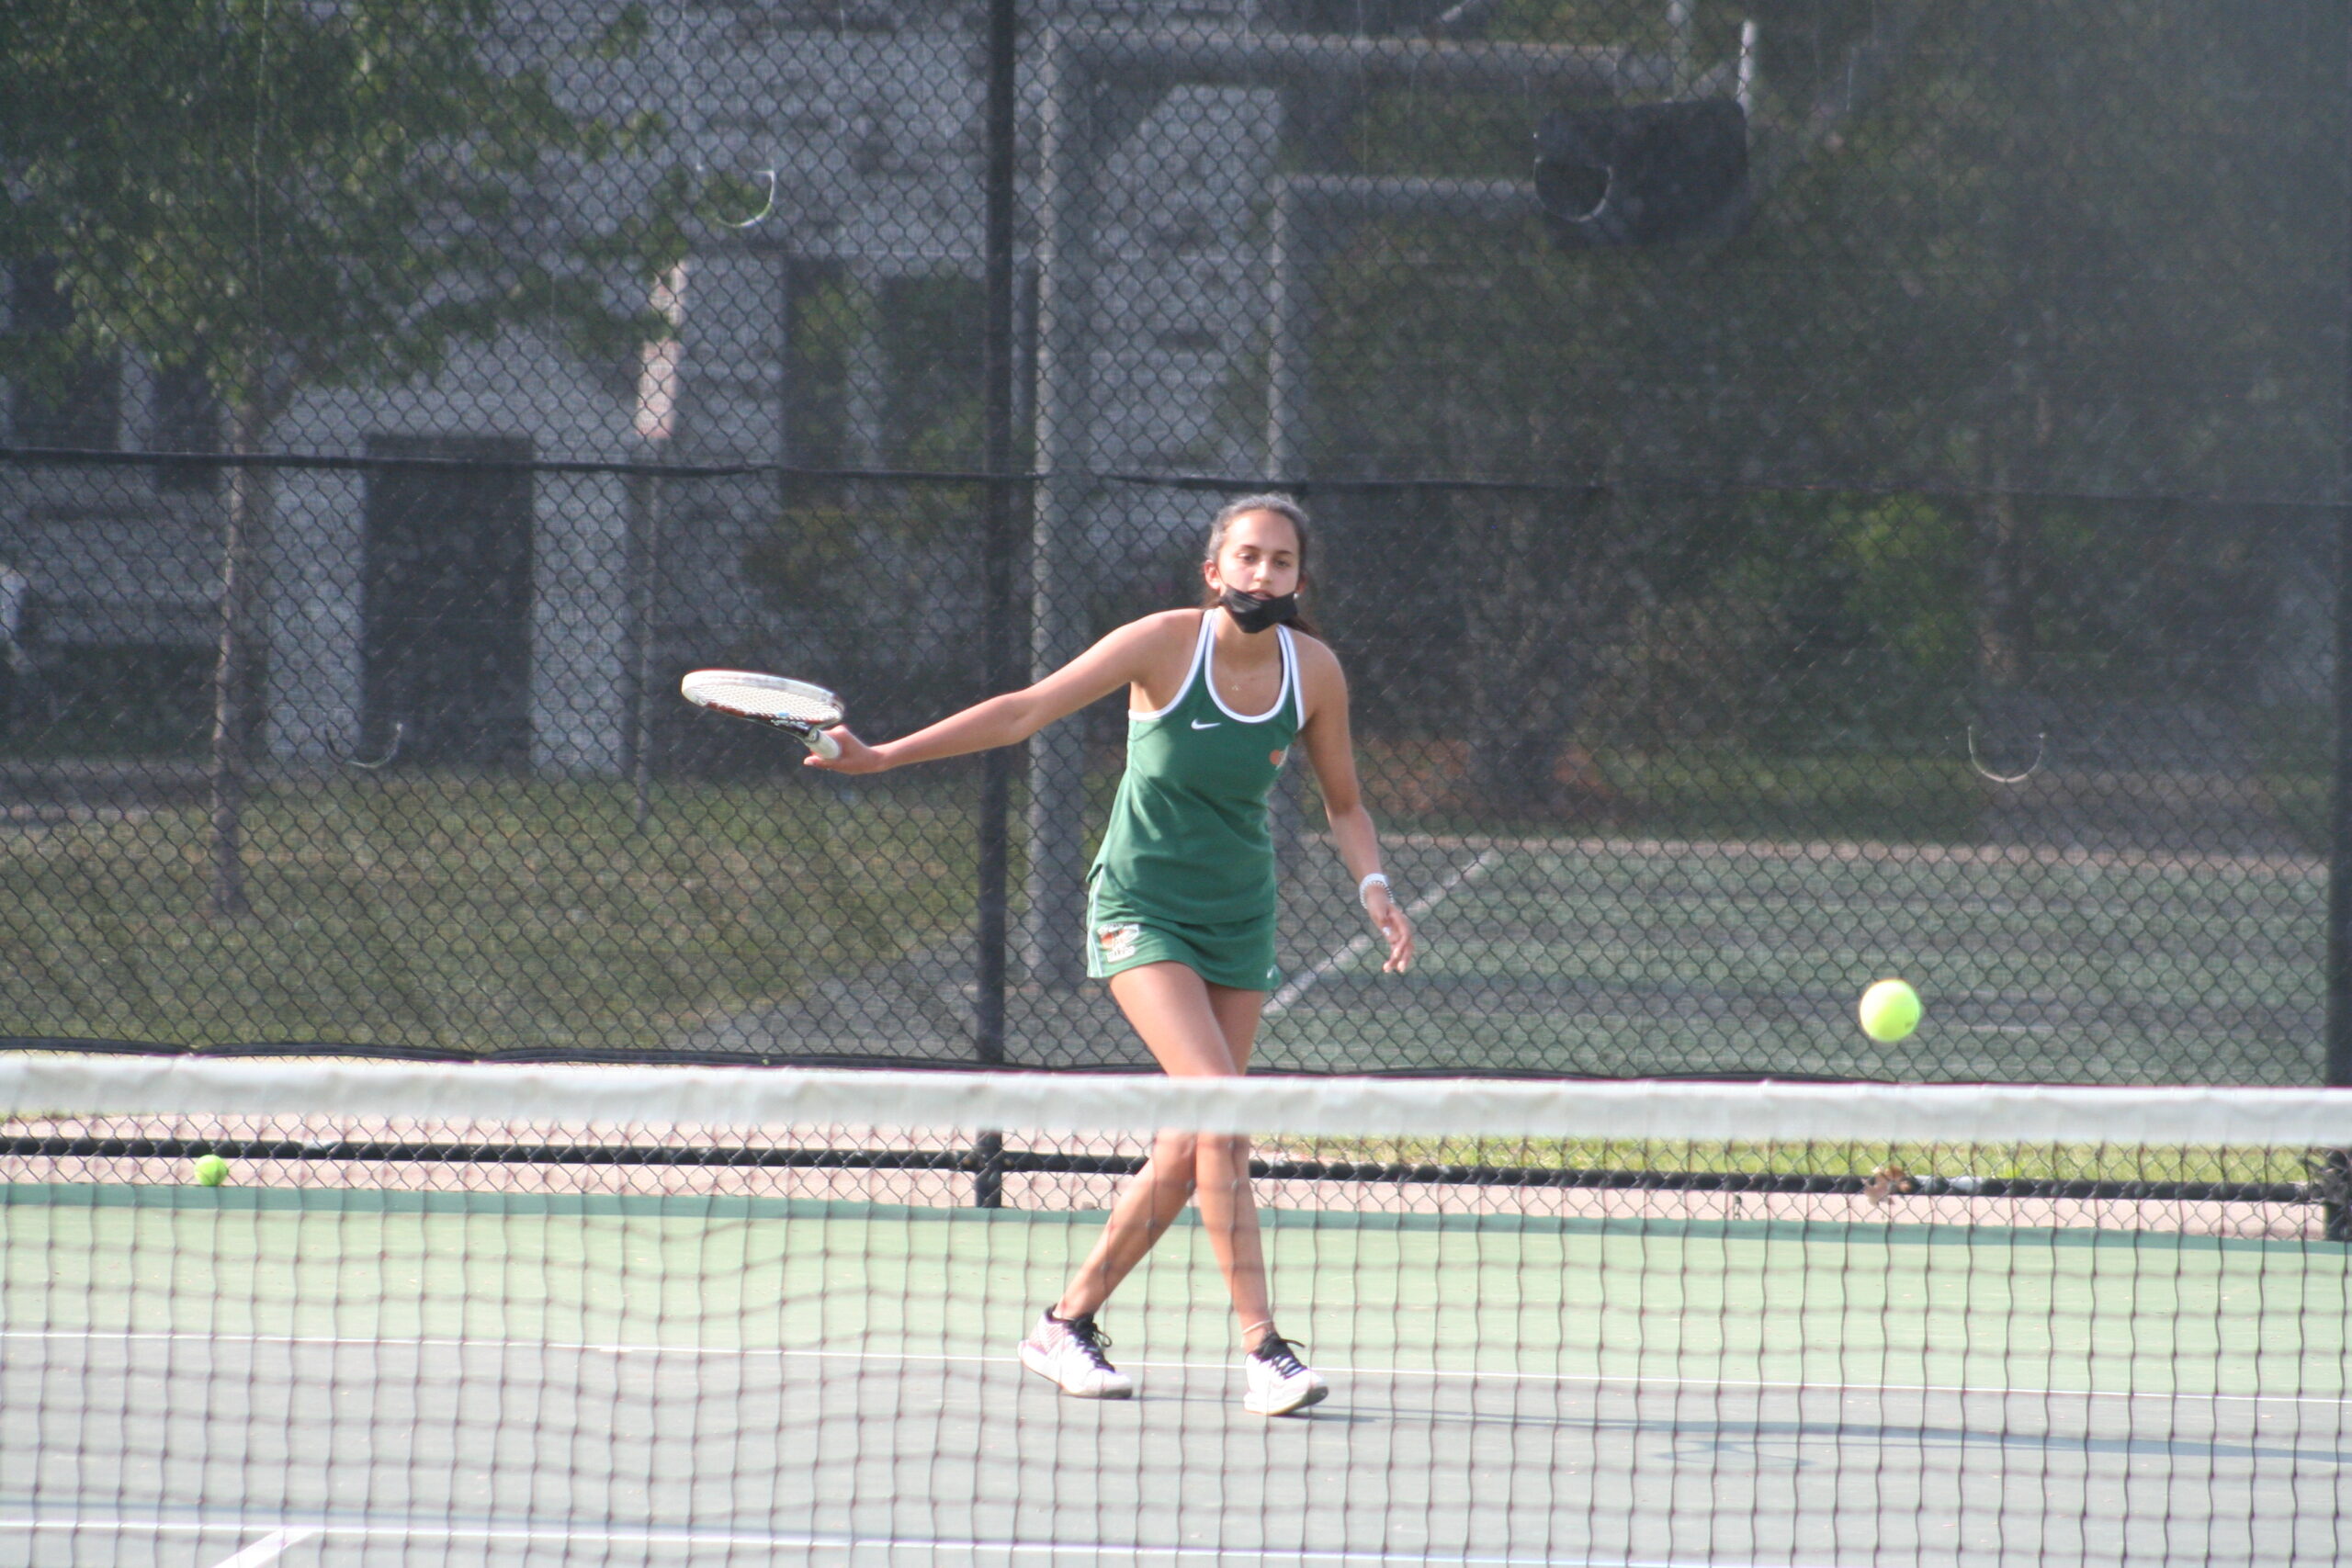 Small HHS girls tennis team competes with TVL’s best